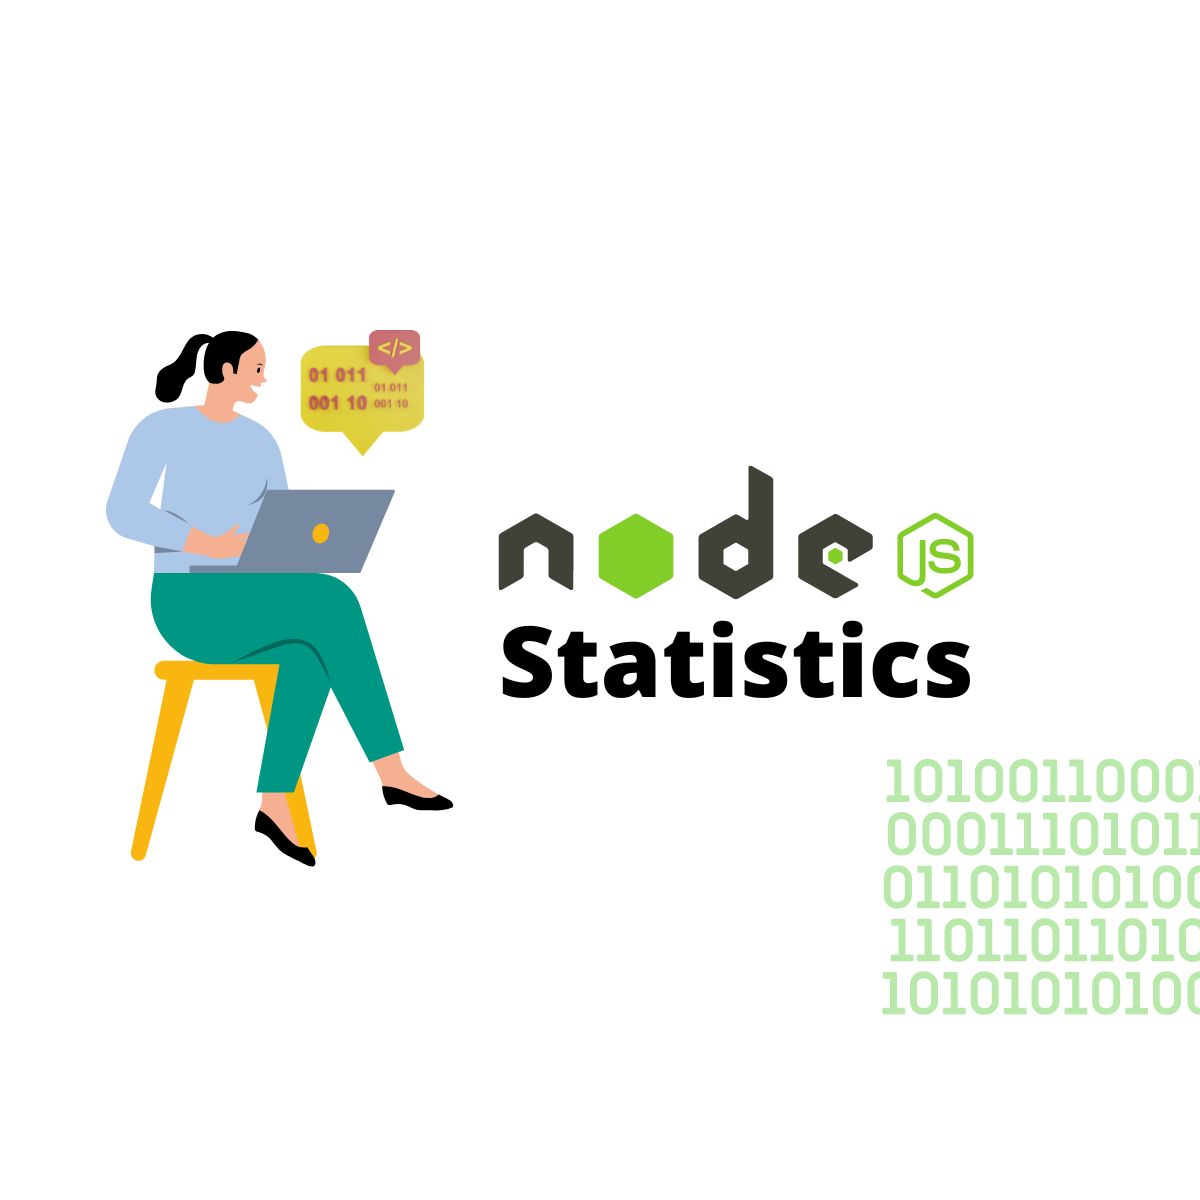 60+ Mind-Blowing Node JS Statistics That Prove Its Robustness for Future Use